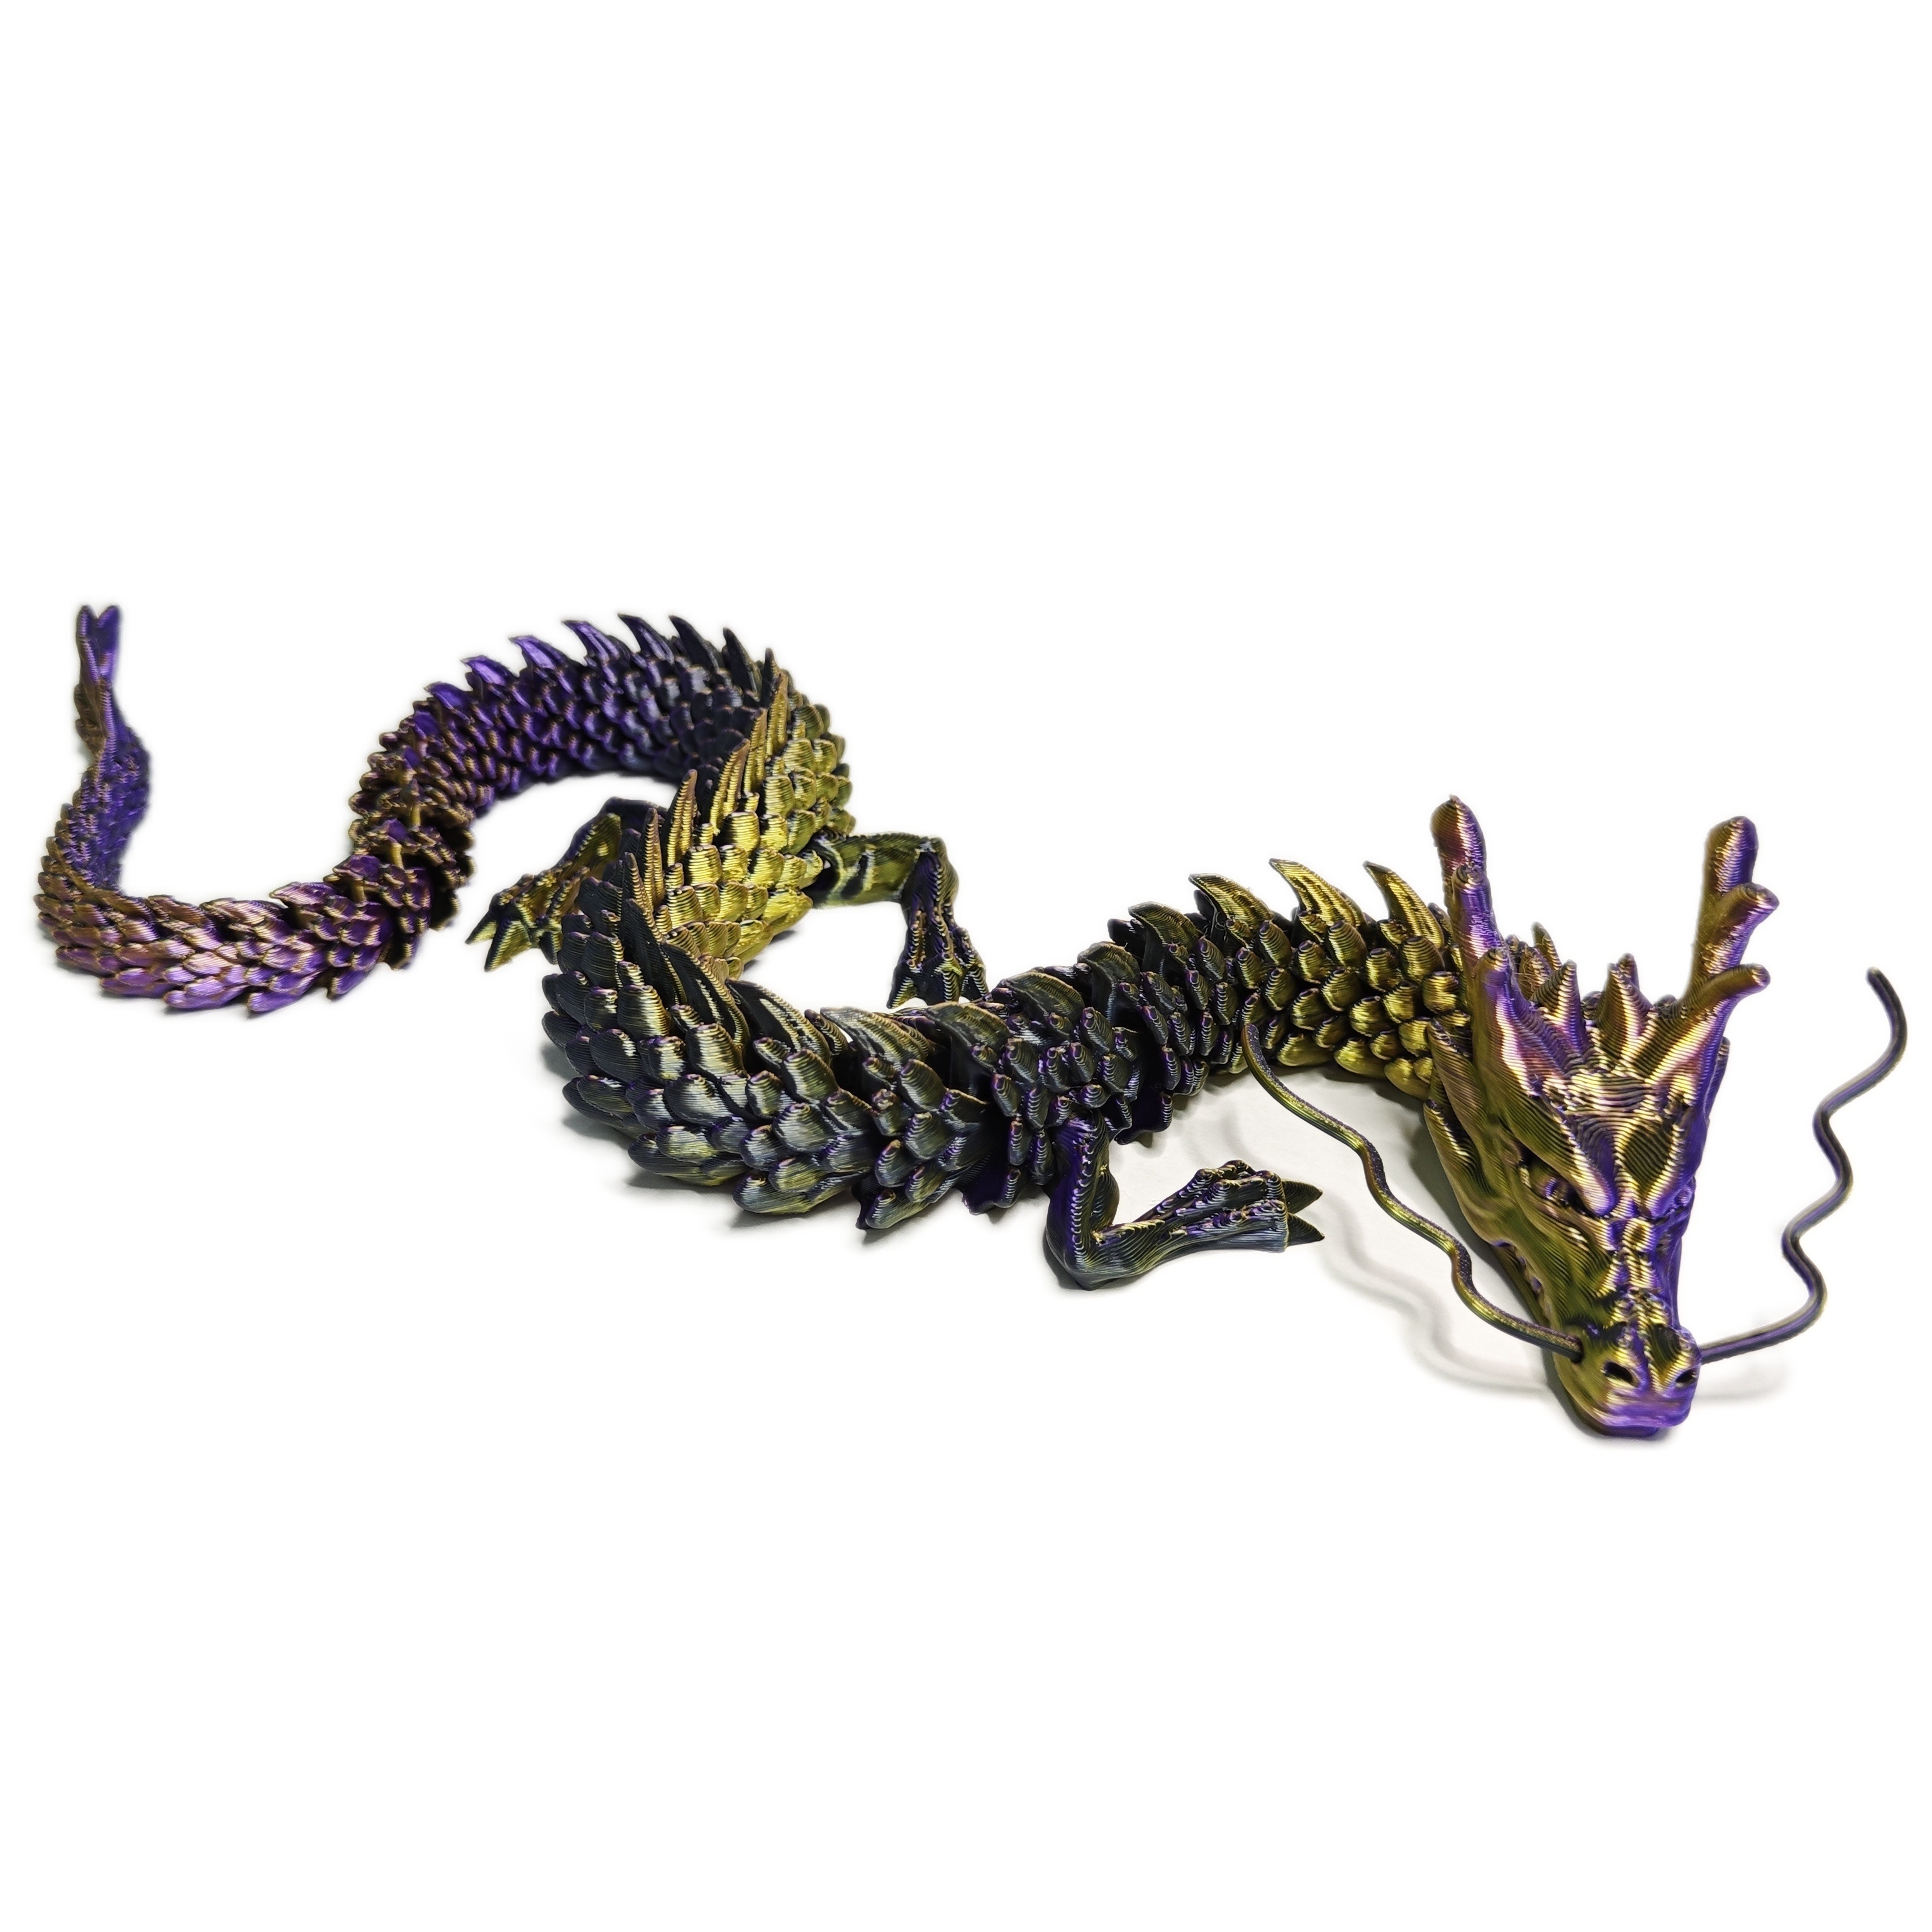 Figurine 3D Printed Dragon 3D Printed Articulated Dragon with